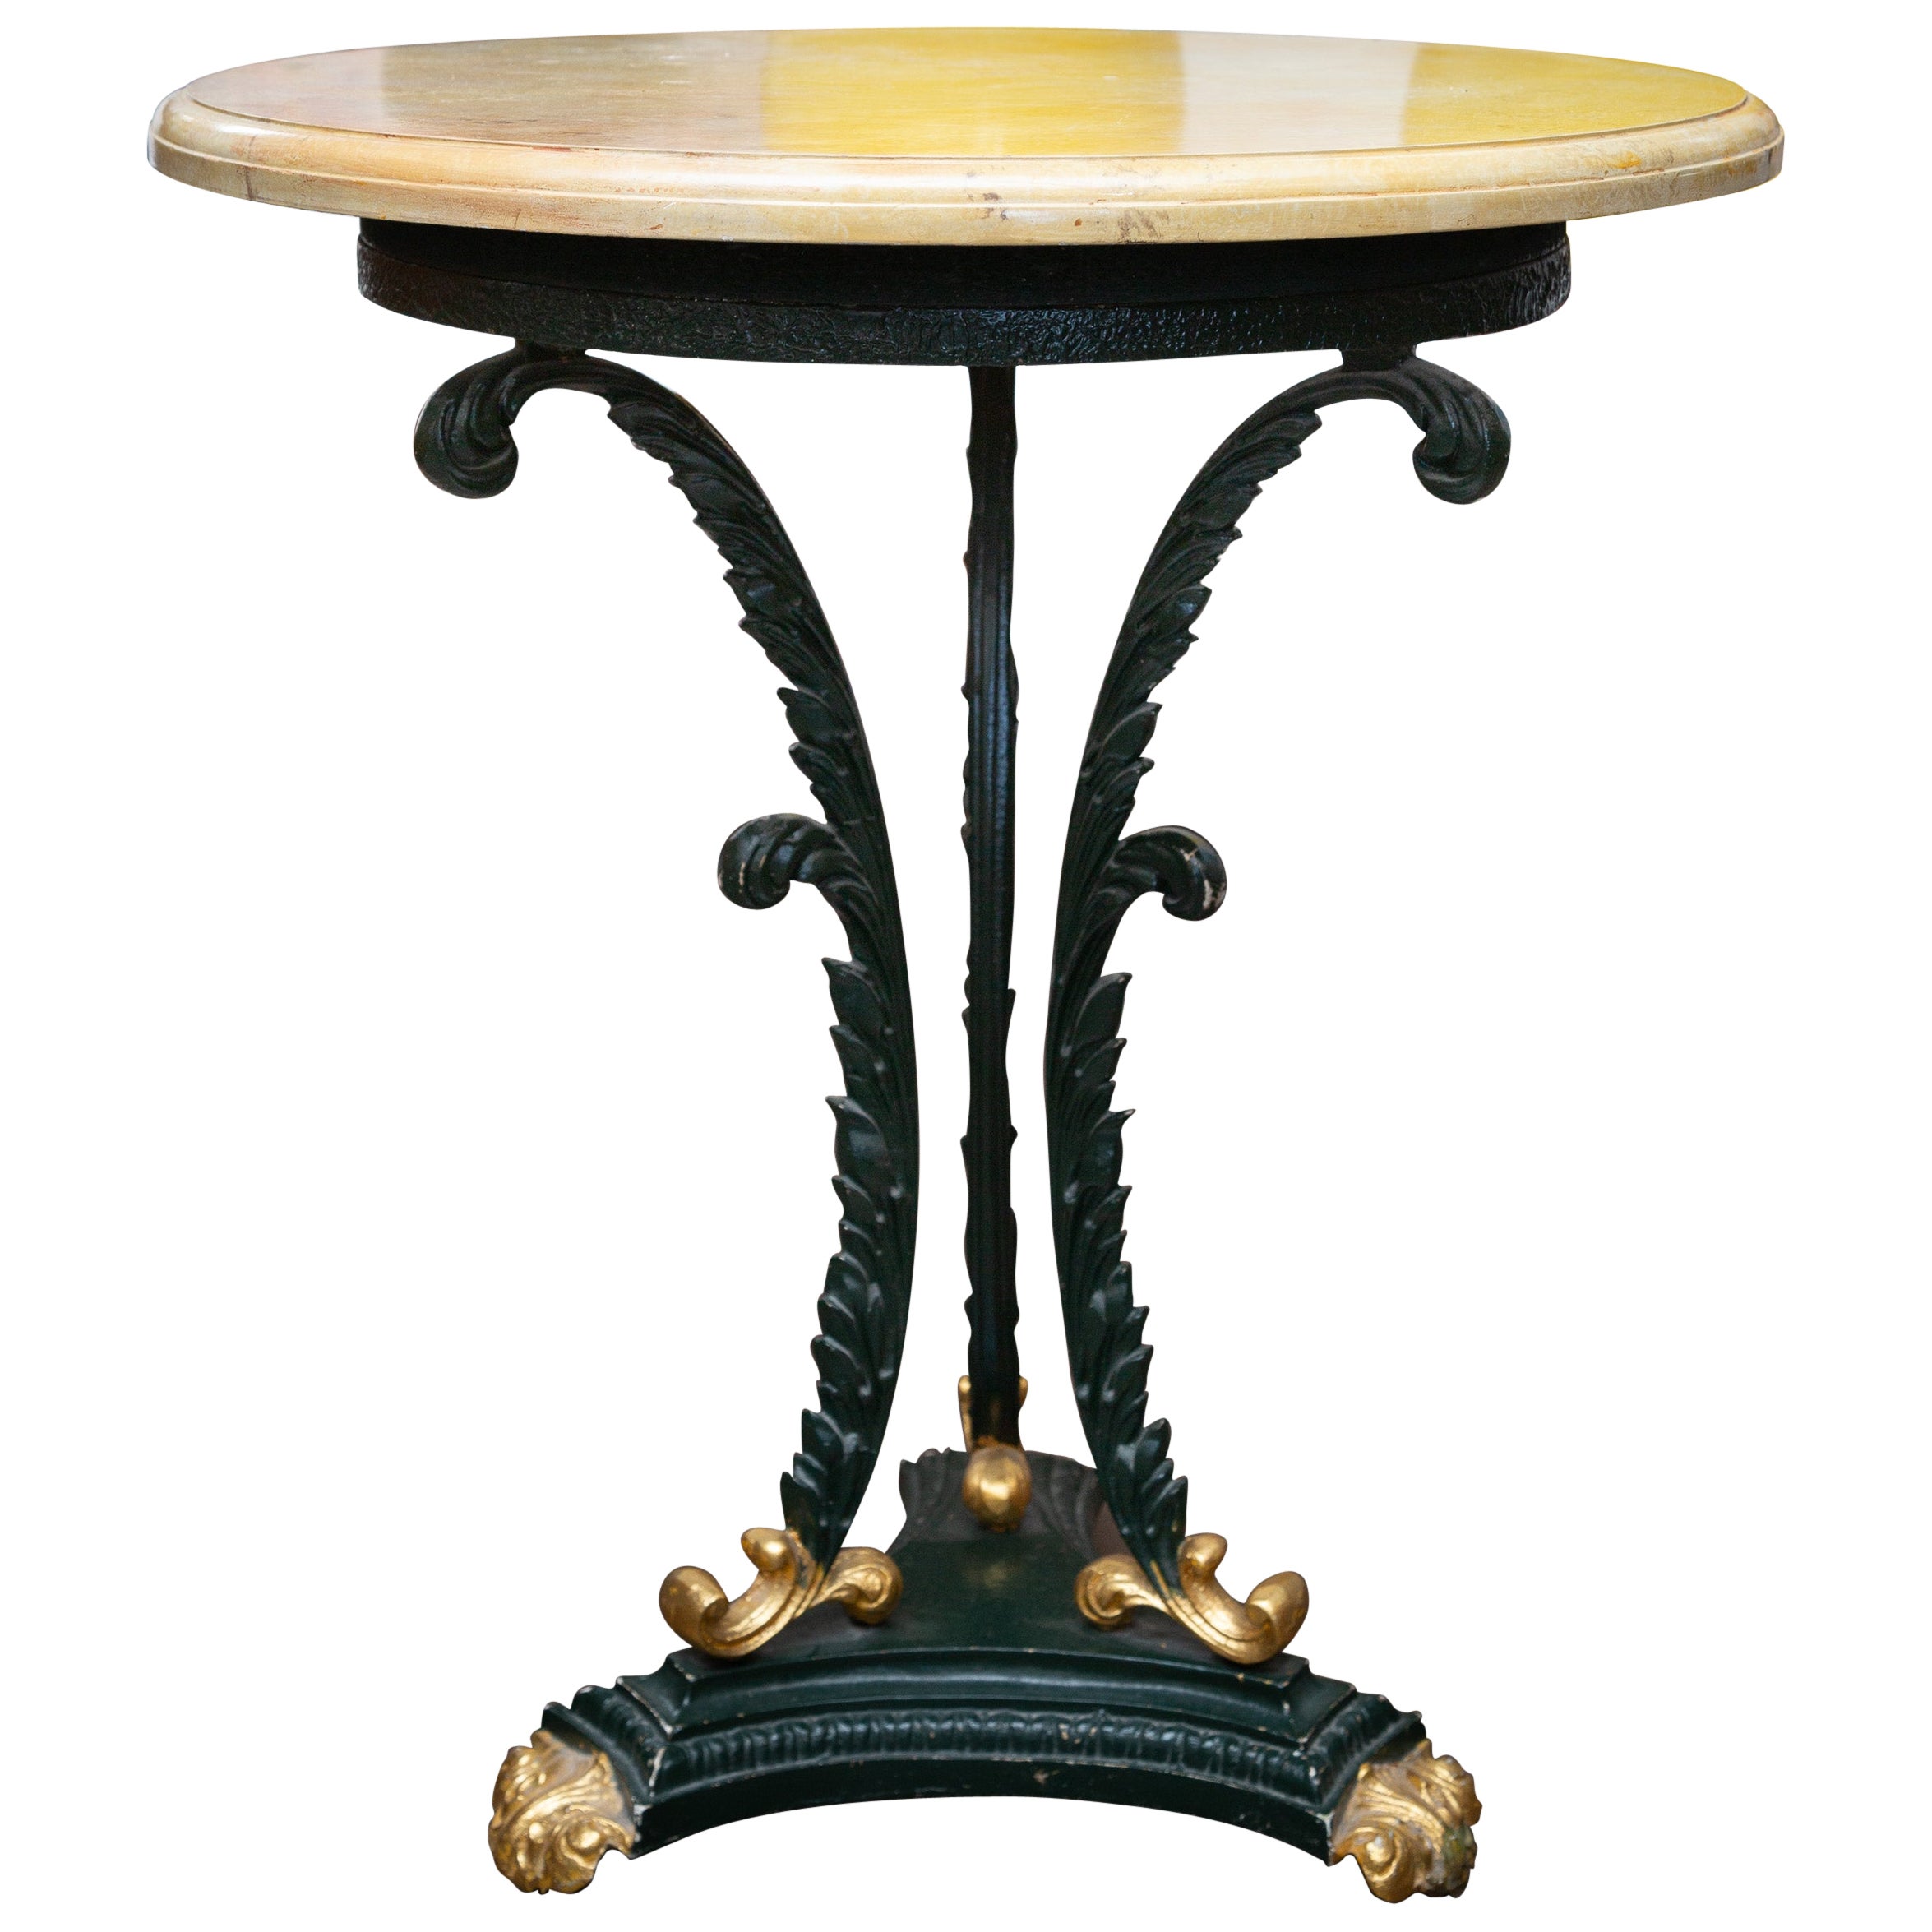 Green Painted and Parcel Gilt Iron Circular Table with Travertine Top